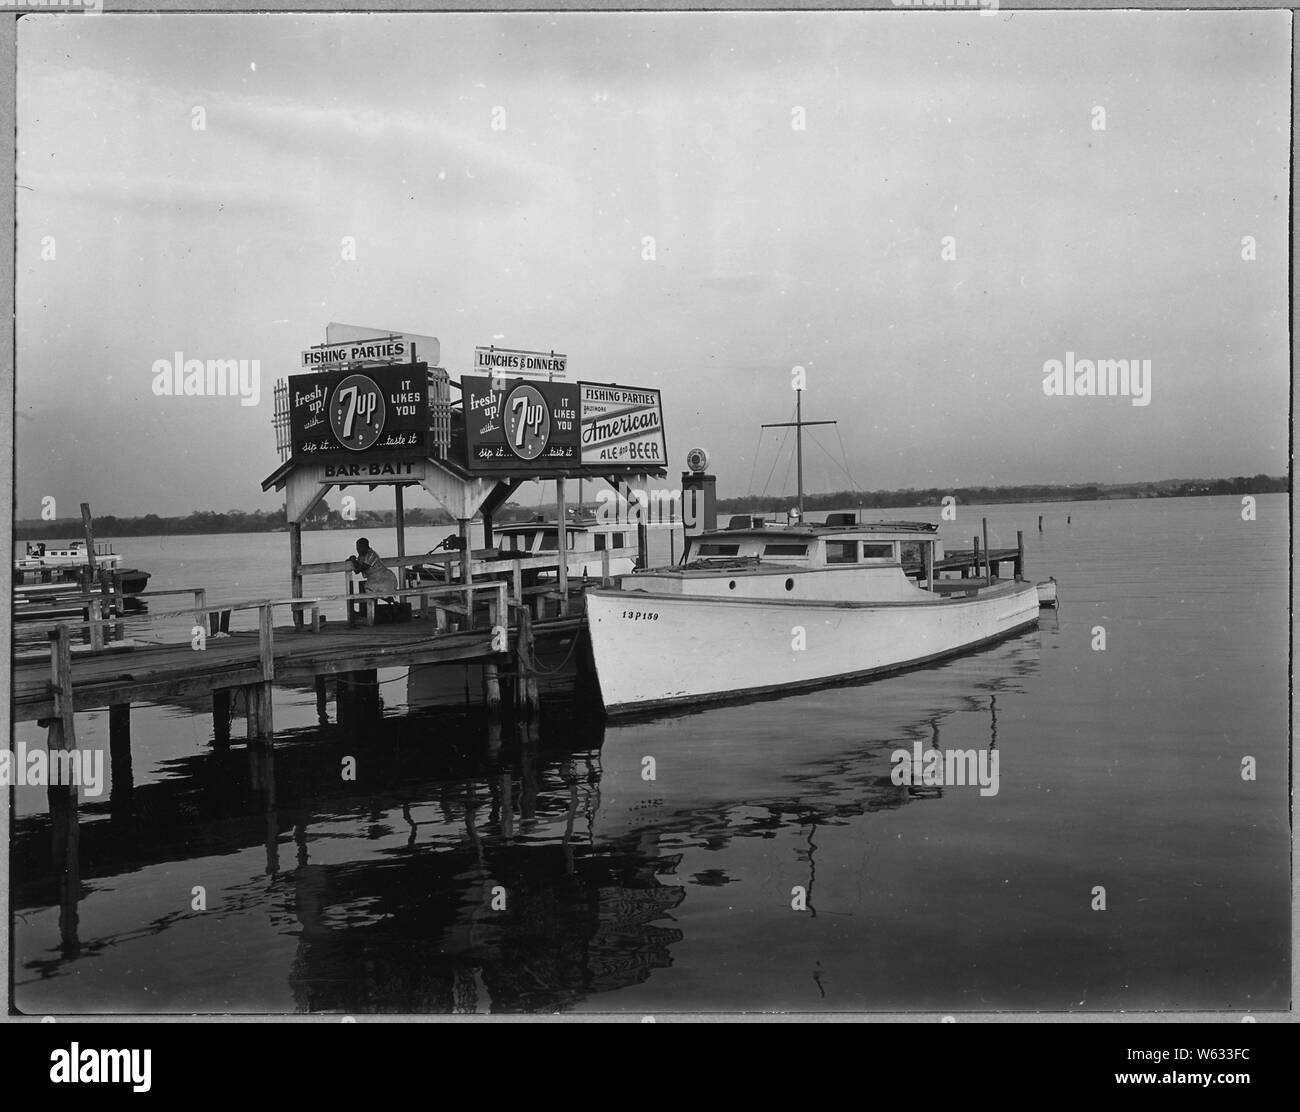 Patuxent river Black and White Stock Photos & Images - Alamy